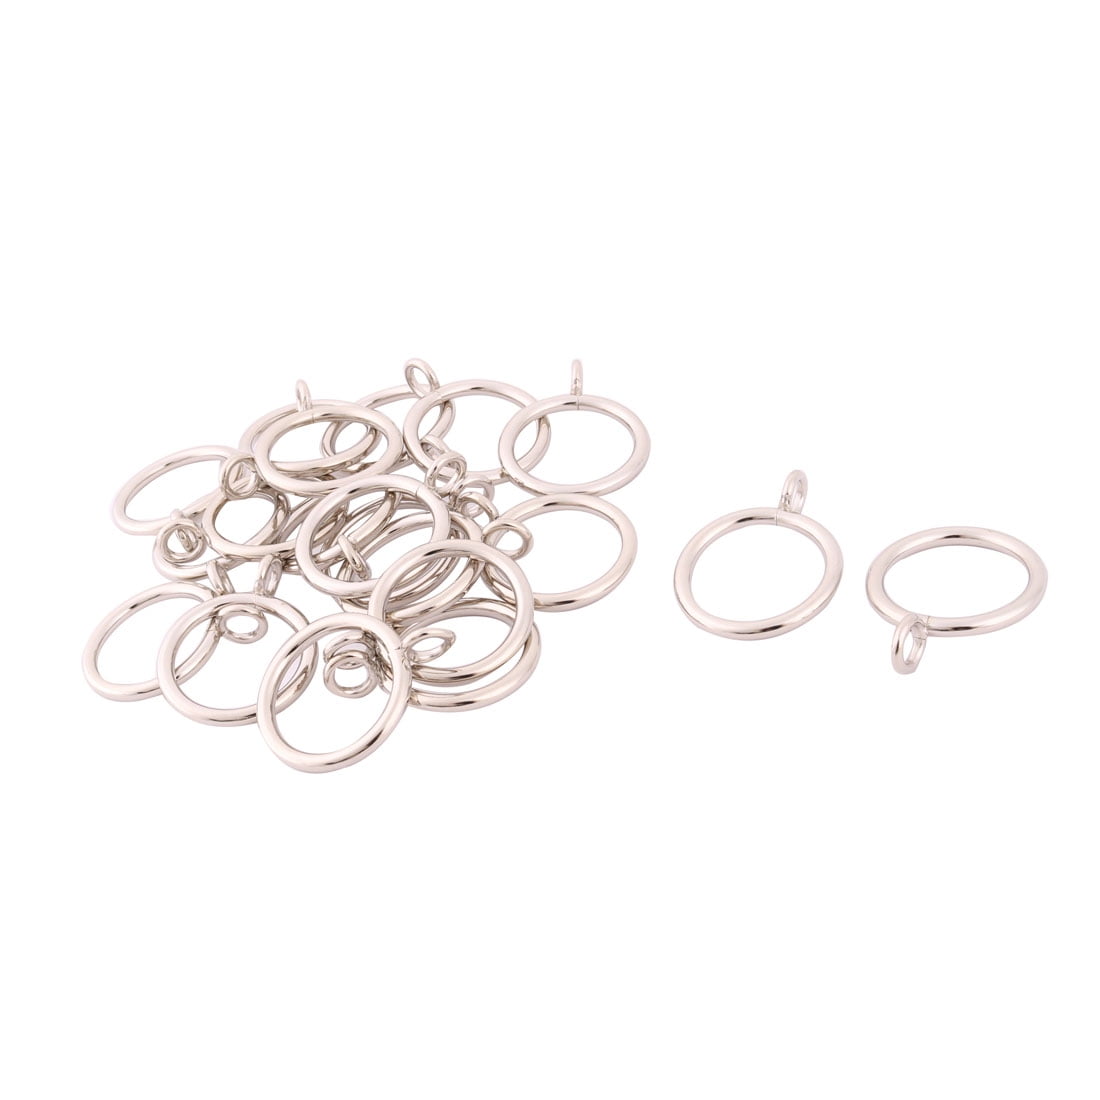 Metal Drapes Curtain Clip Ring Hanging Hooks Silver Tone 1" Inner Dia 24 Sets 